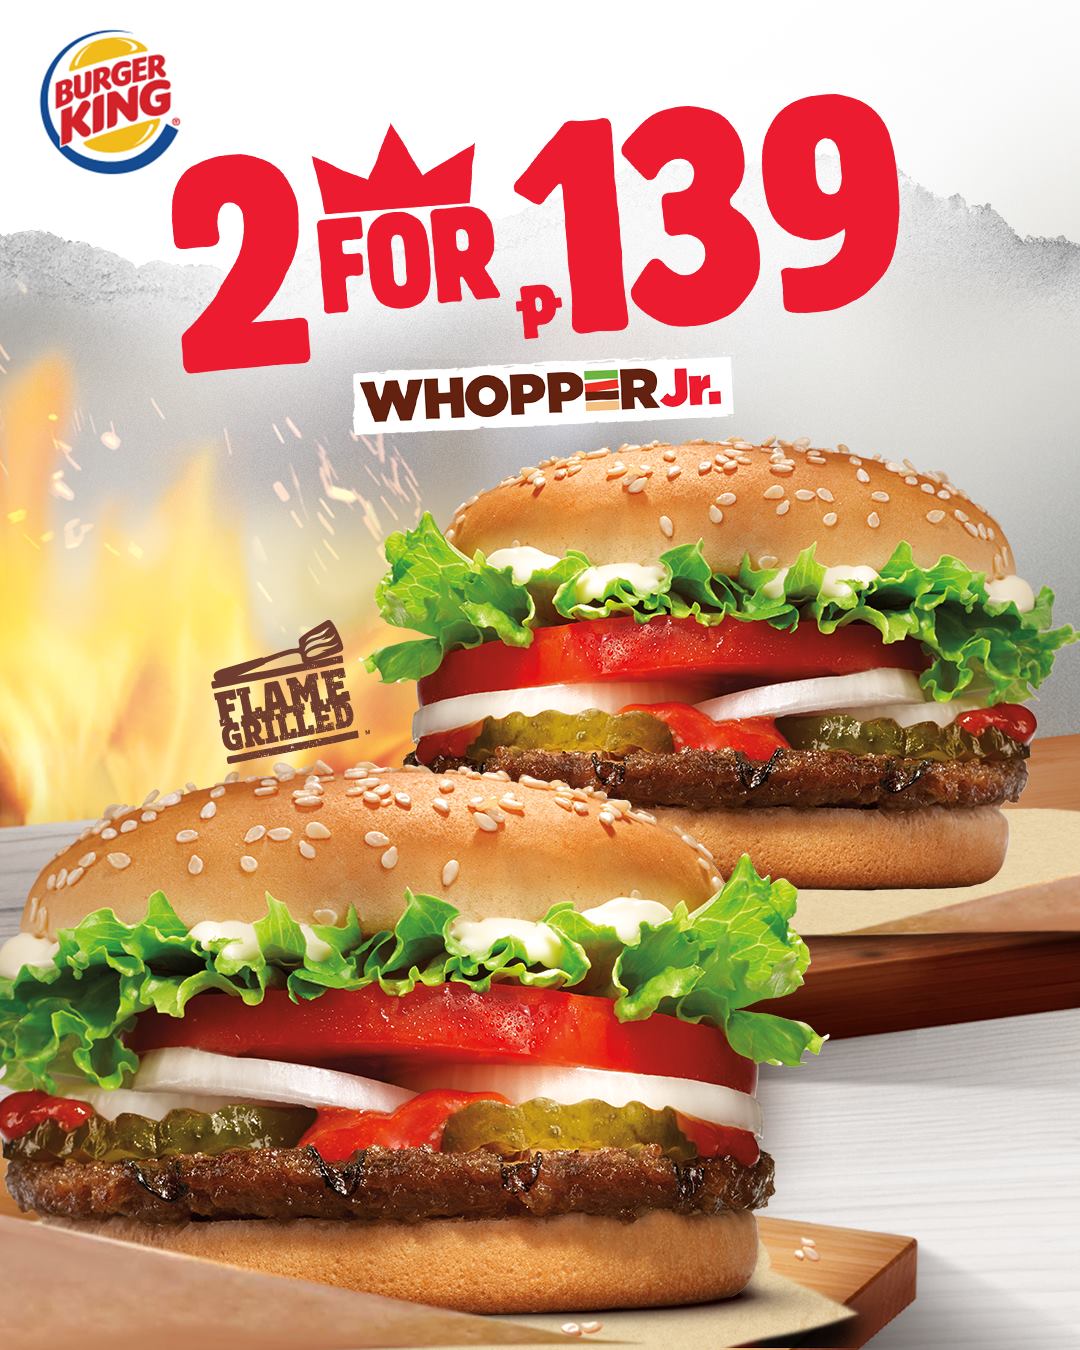 Burger King 2 for P139 Promo